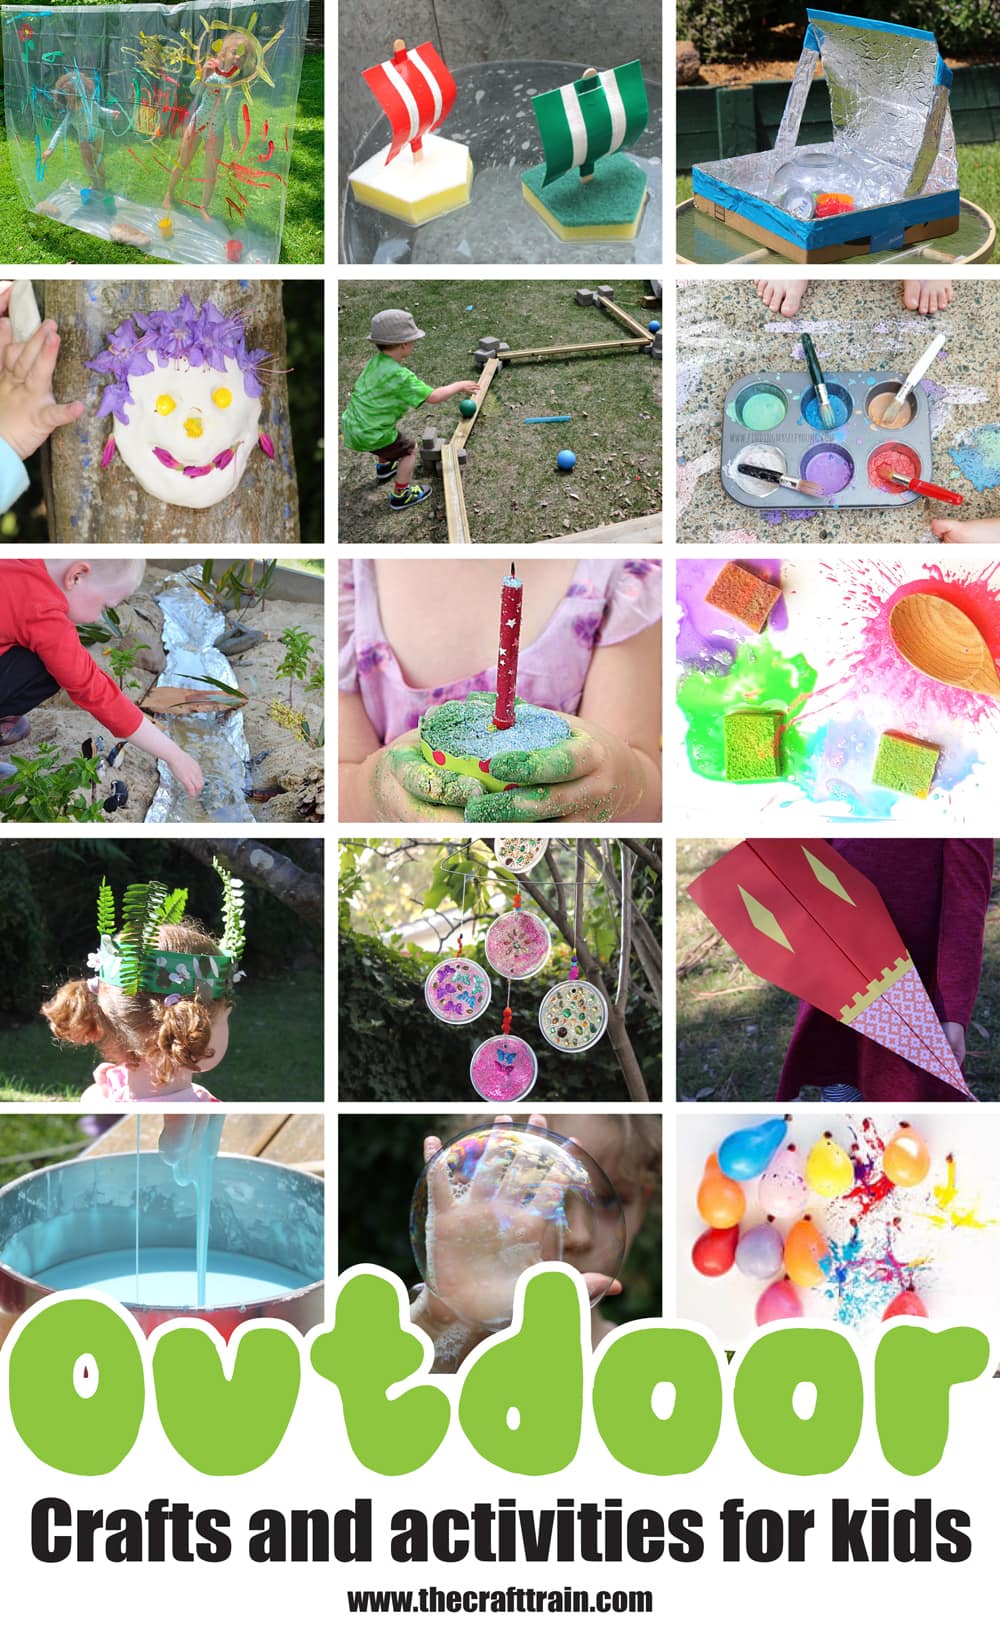 outdoor crafts and activities for kids